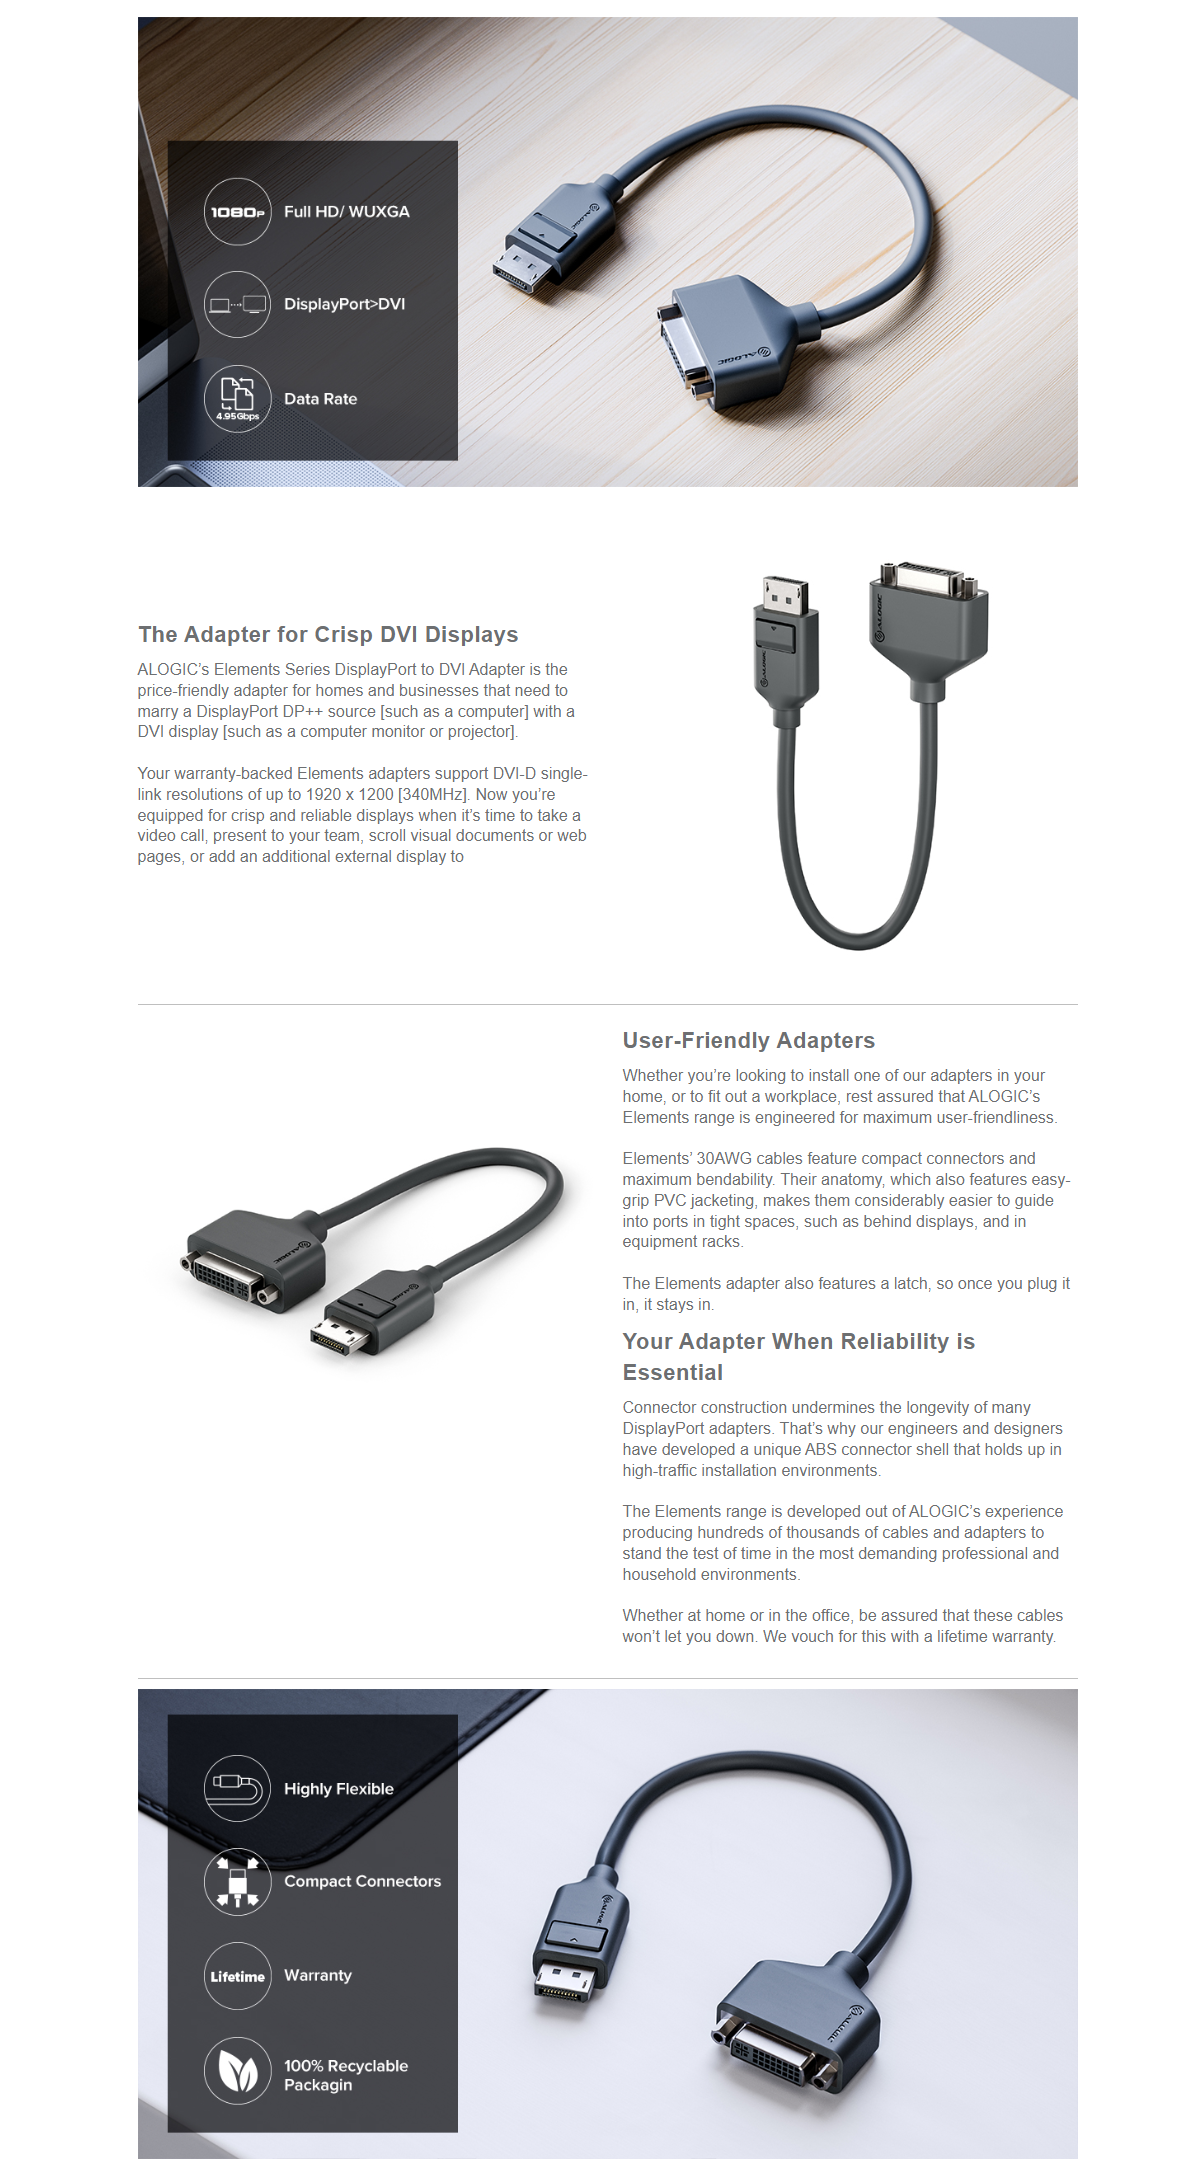 A large marketing image providing additional information about the product ALOGIC DisplayPort to DVI Adapter - Additional alt info not provided